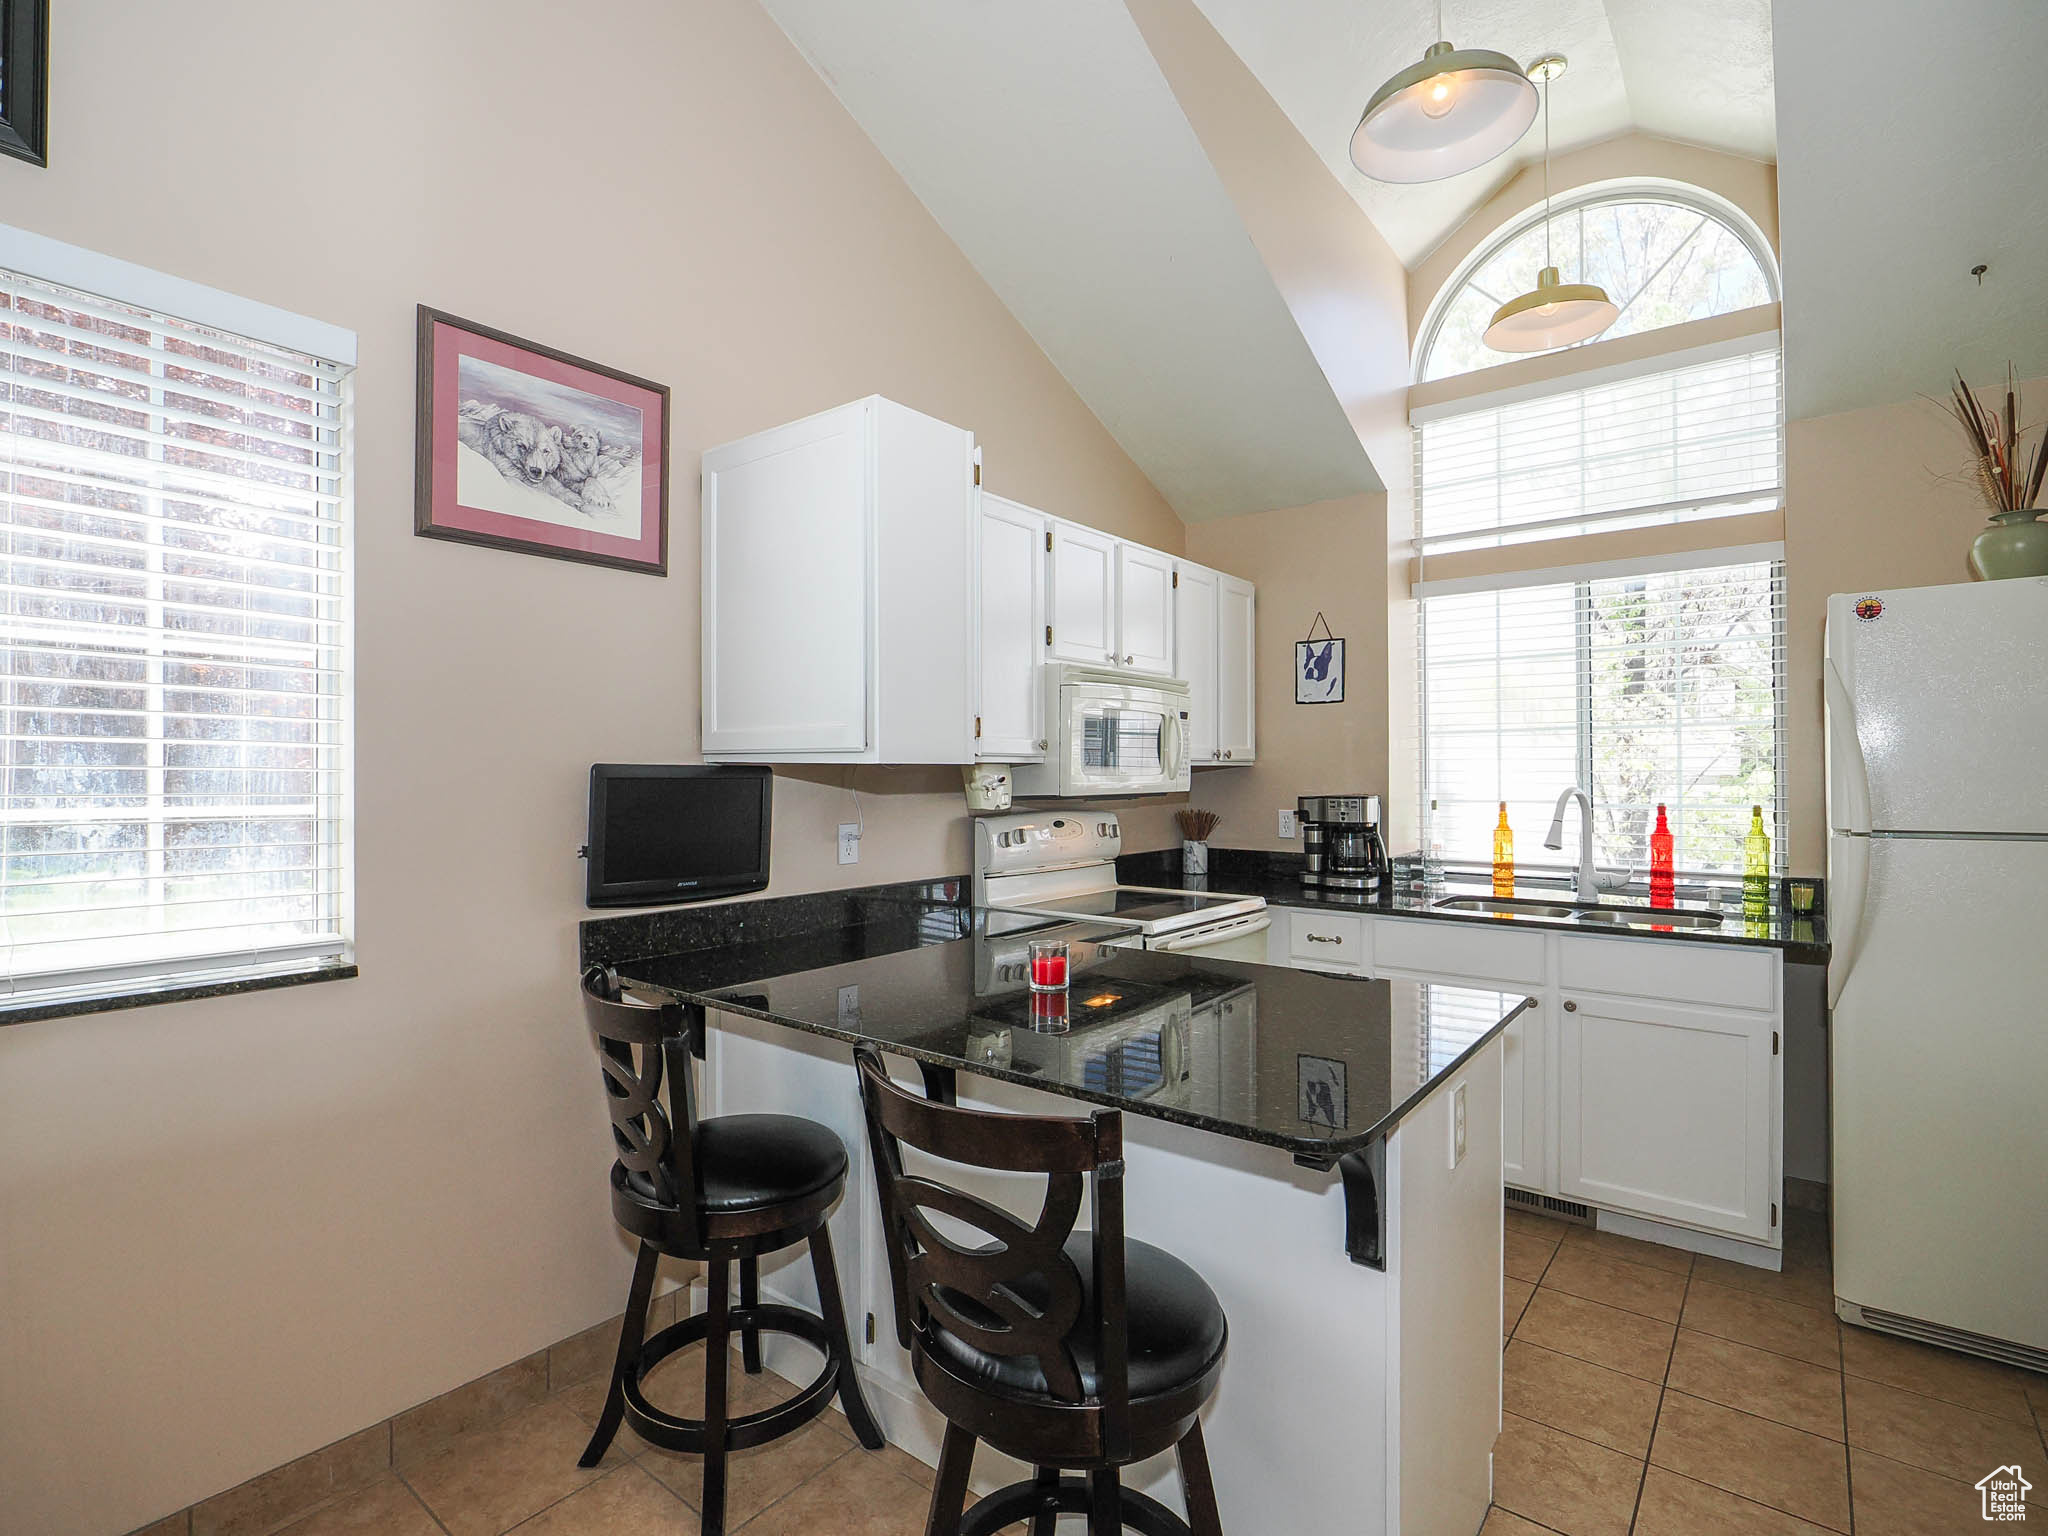 Kitchen featuring a kitchen bar, white cabinets, white appliances, and sink